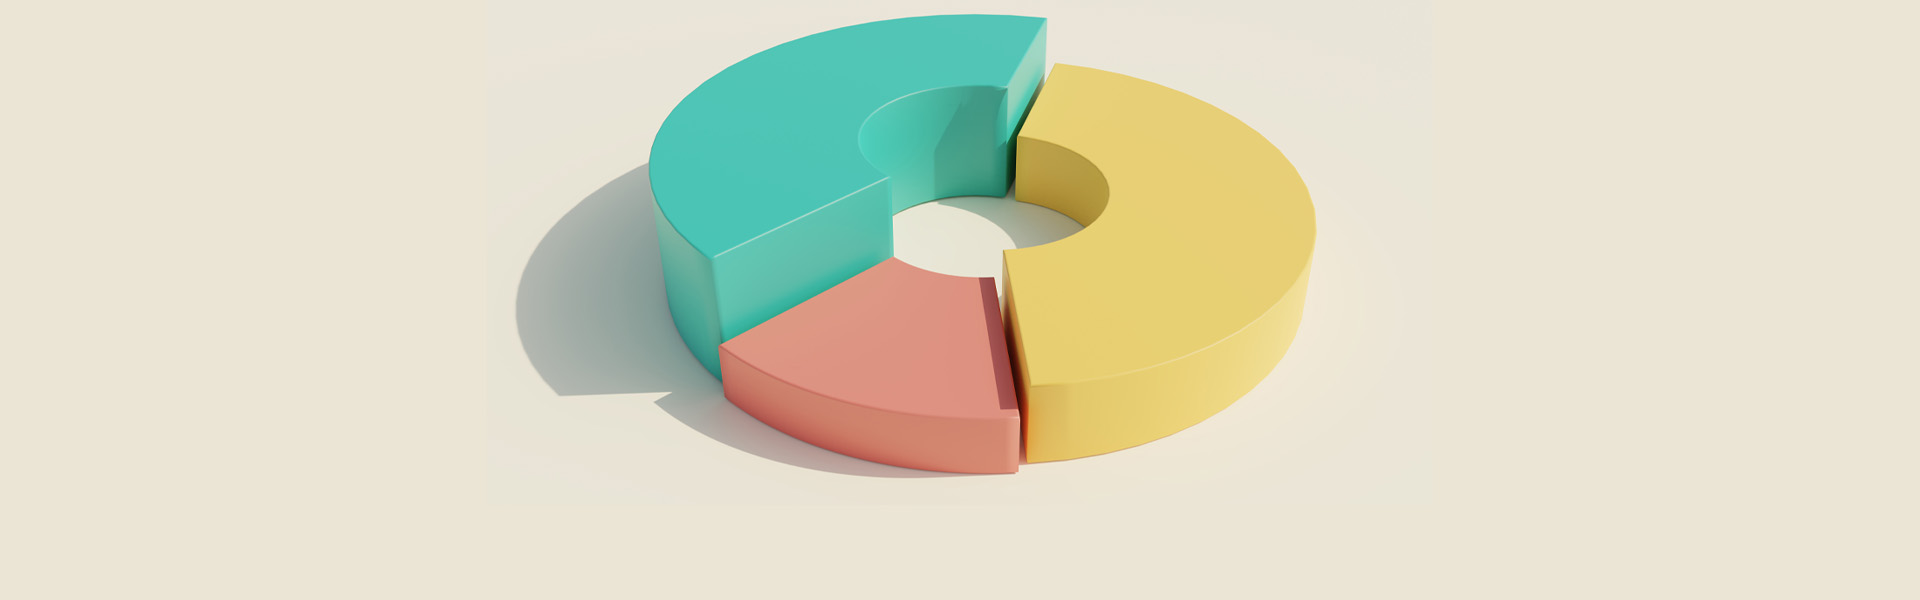 Isometric Donut chart. Financial analysis concept